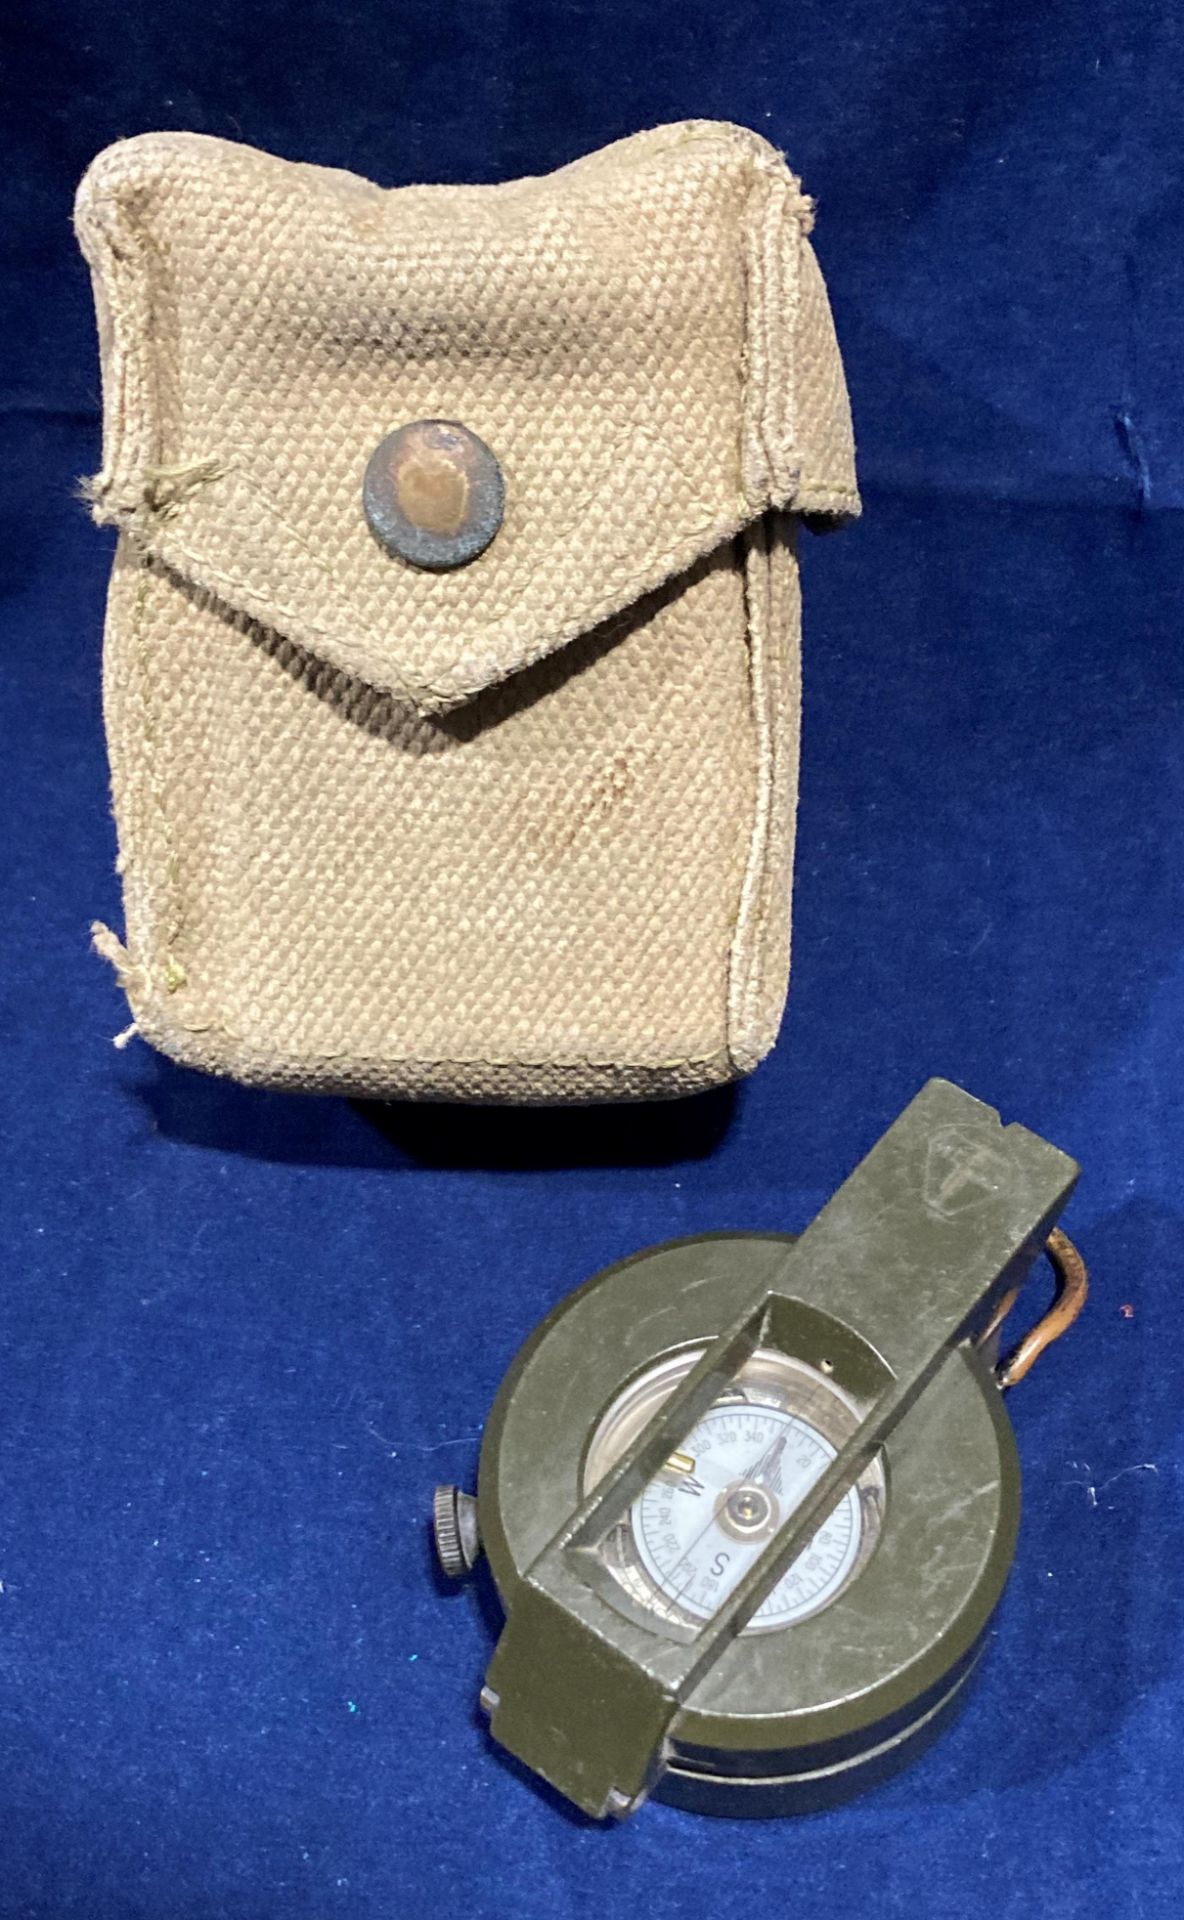 An IDF Israel compass by NG nIG (ELOP) in plastic and metal in fabric military bag (Saleroom